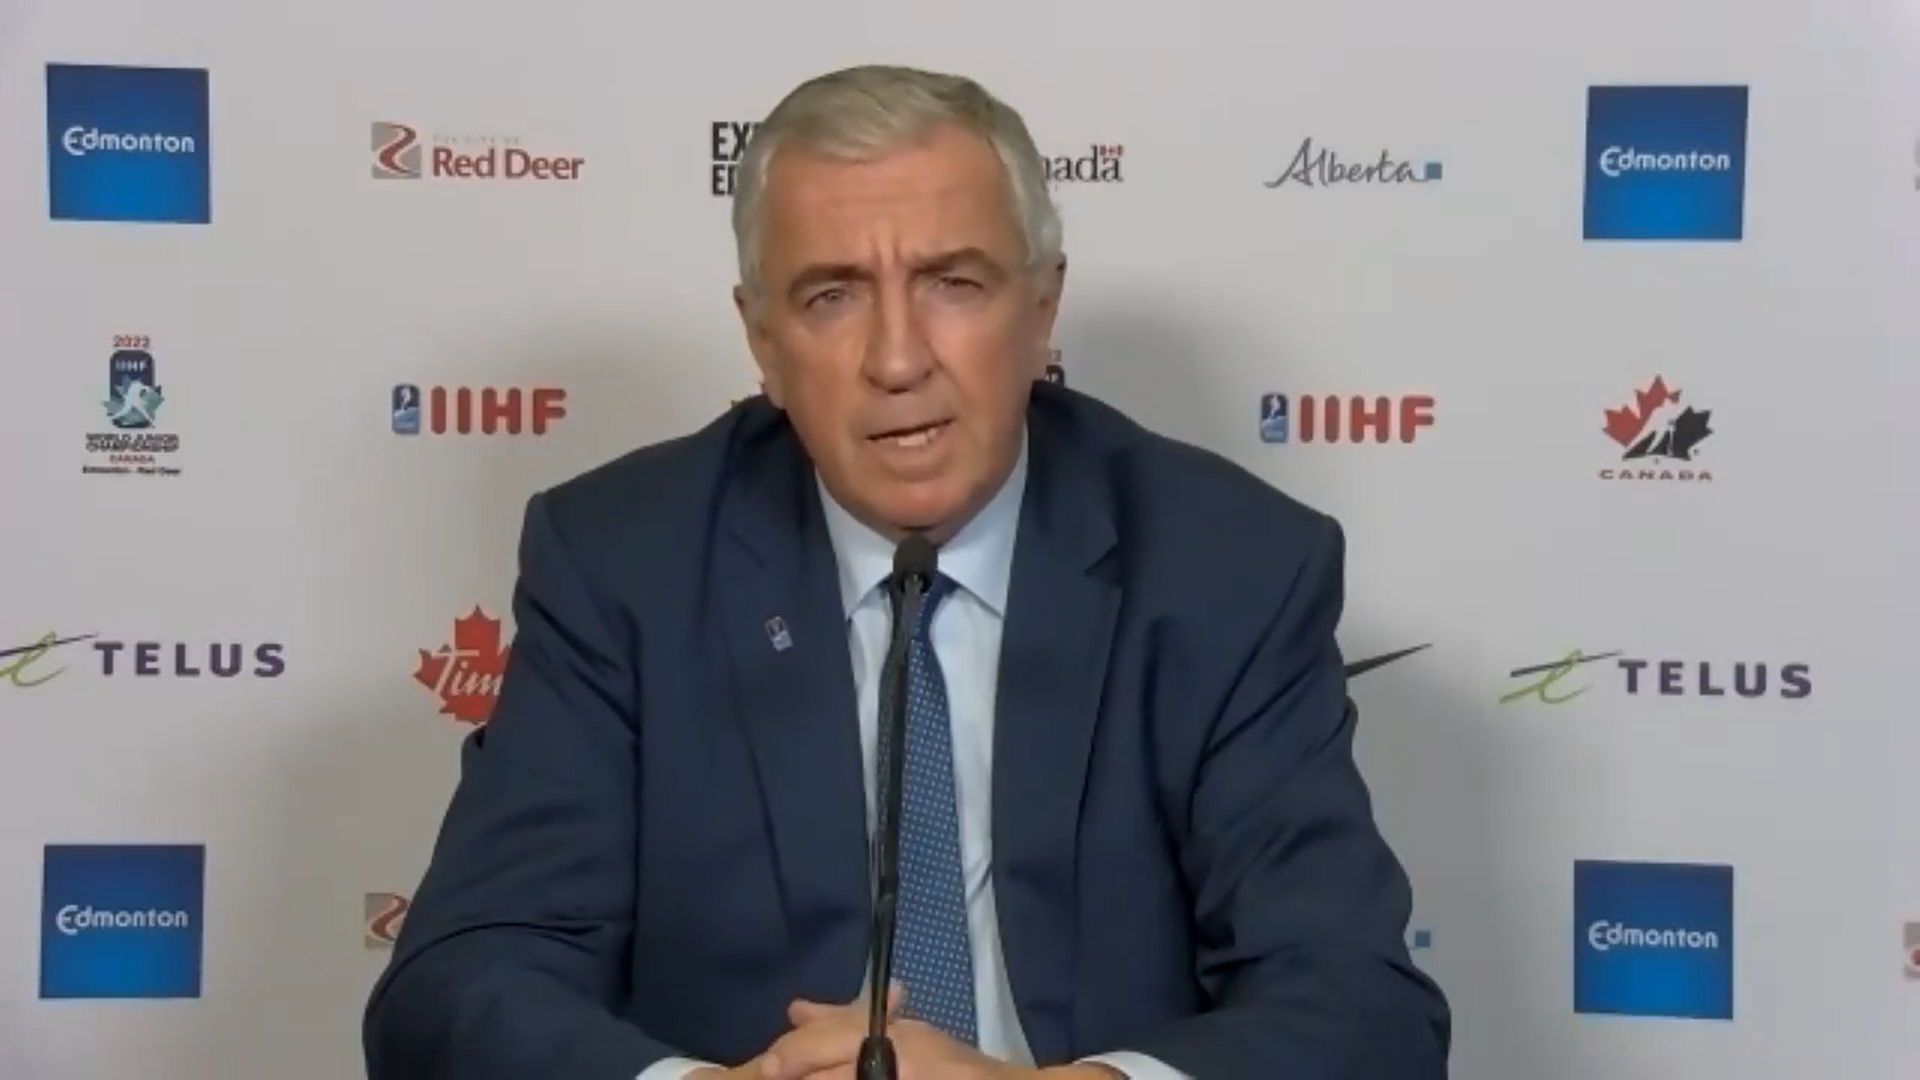 IIHF President Luc Tardif expressed hope the event could be continued at a later date ©IIHF